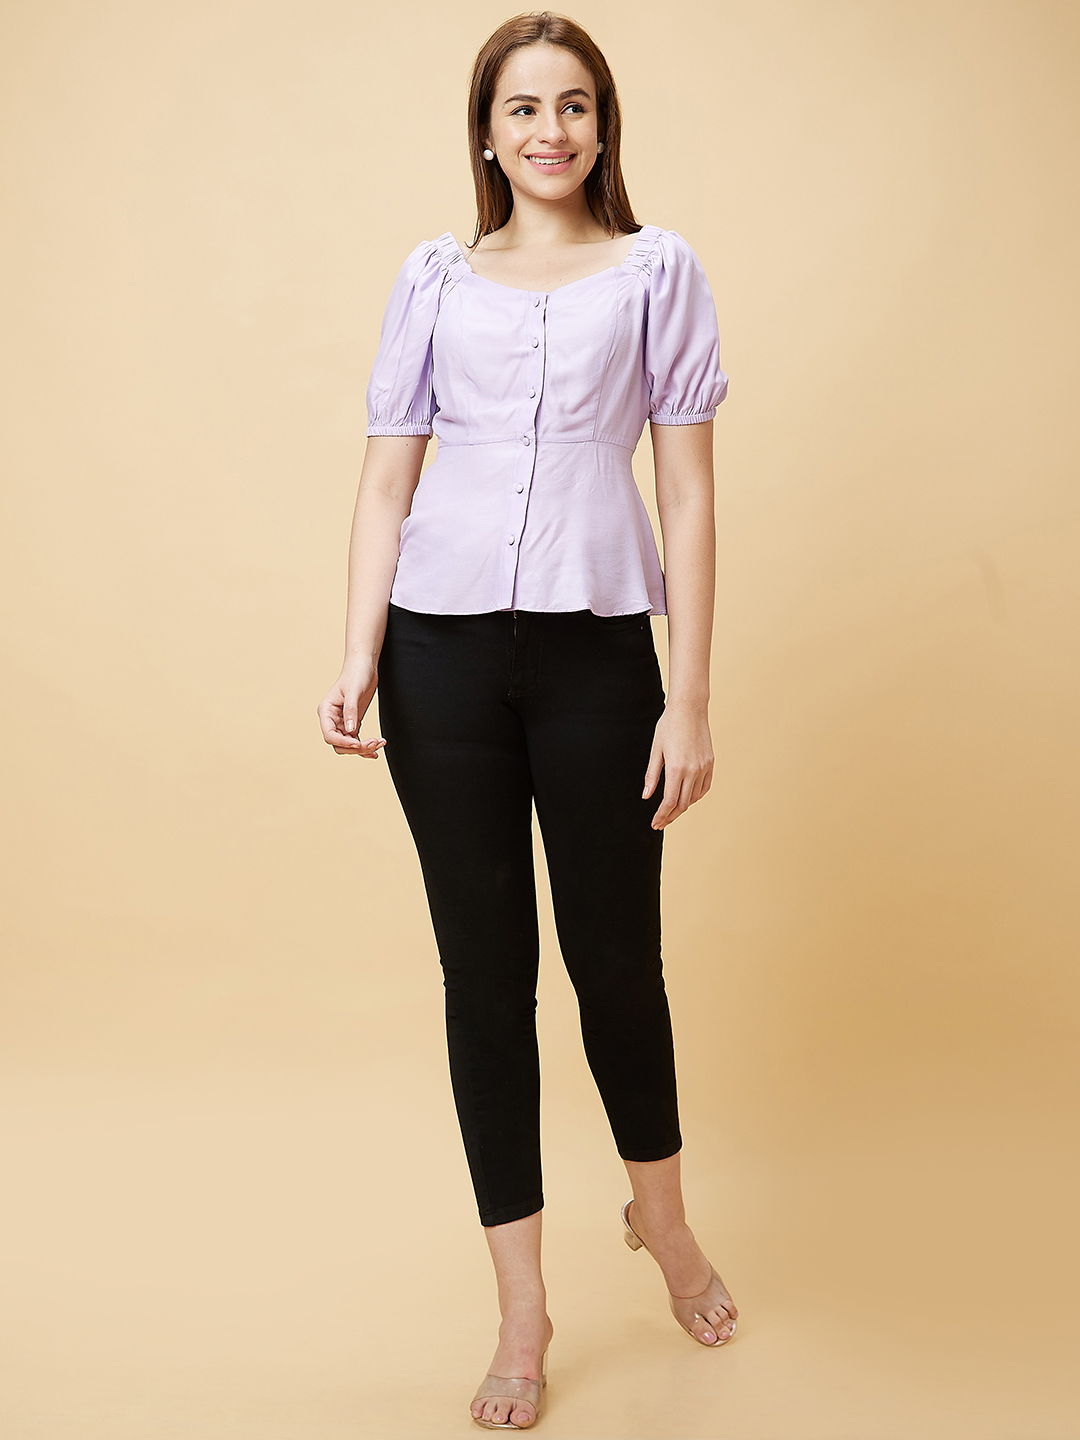 Globus Women Lilac Solid Casual Peplum Fit To Flare Top